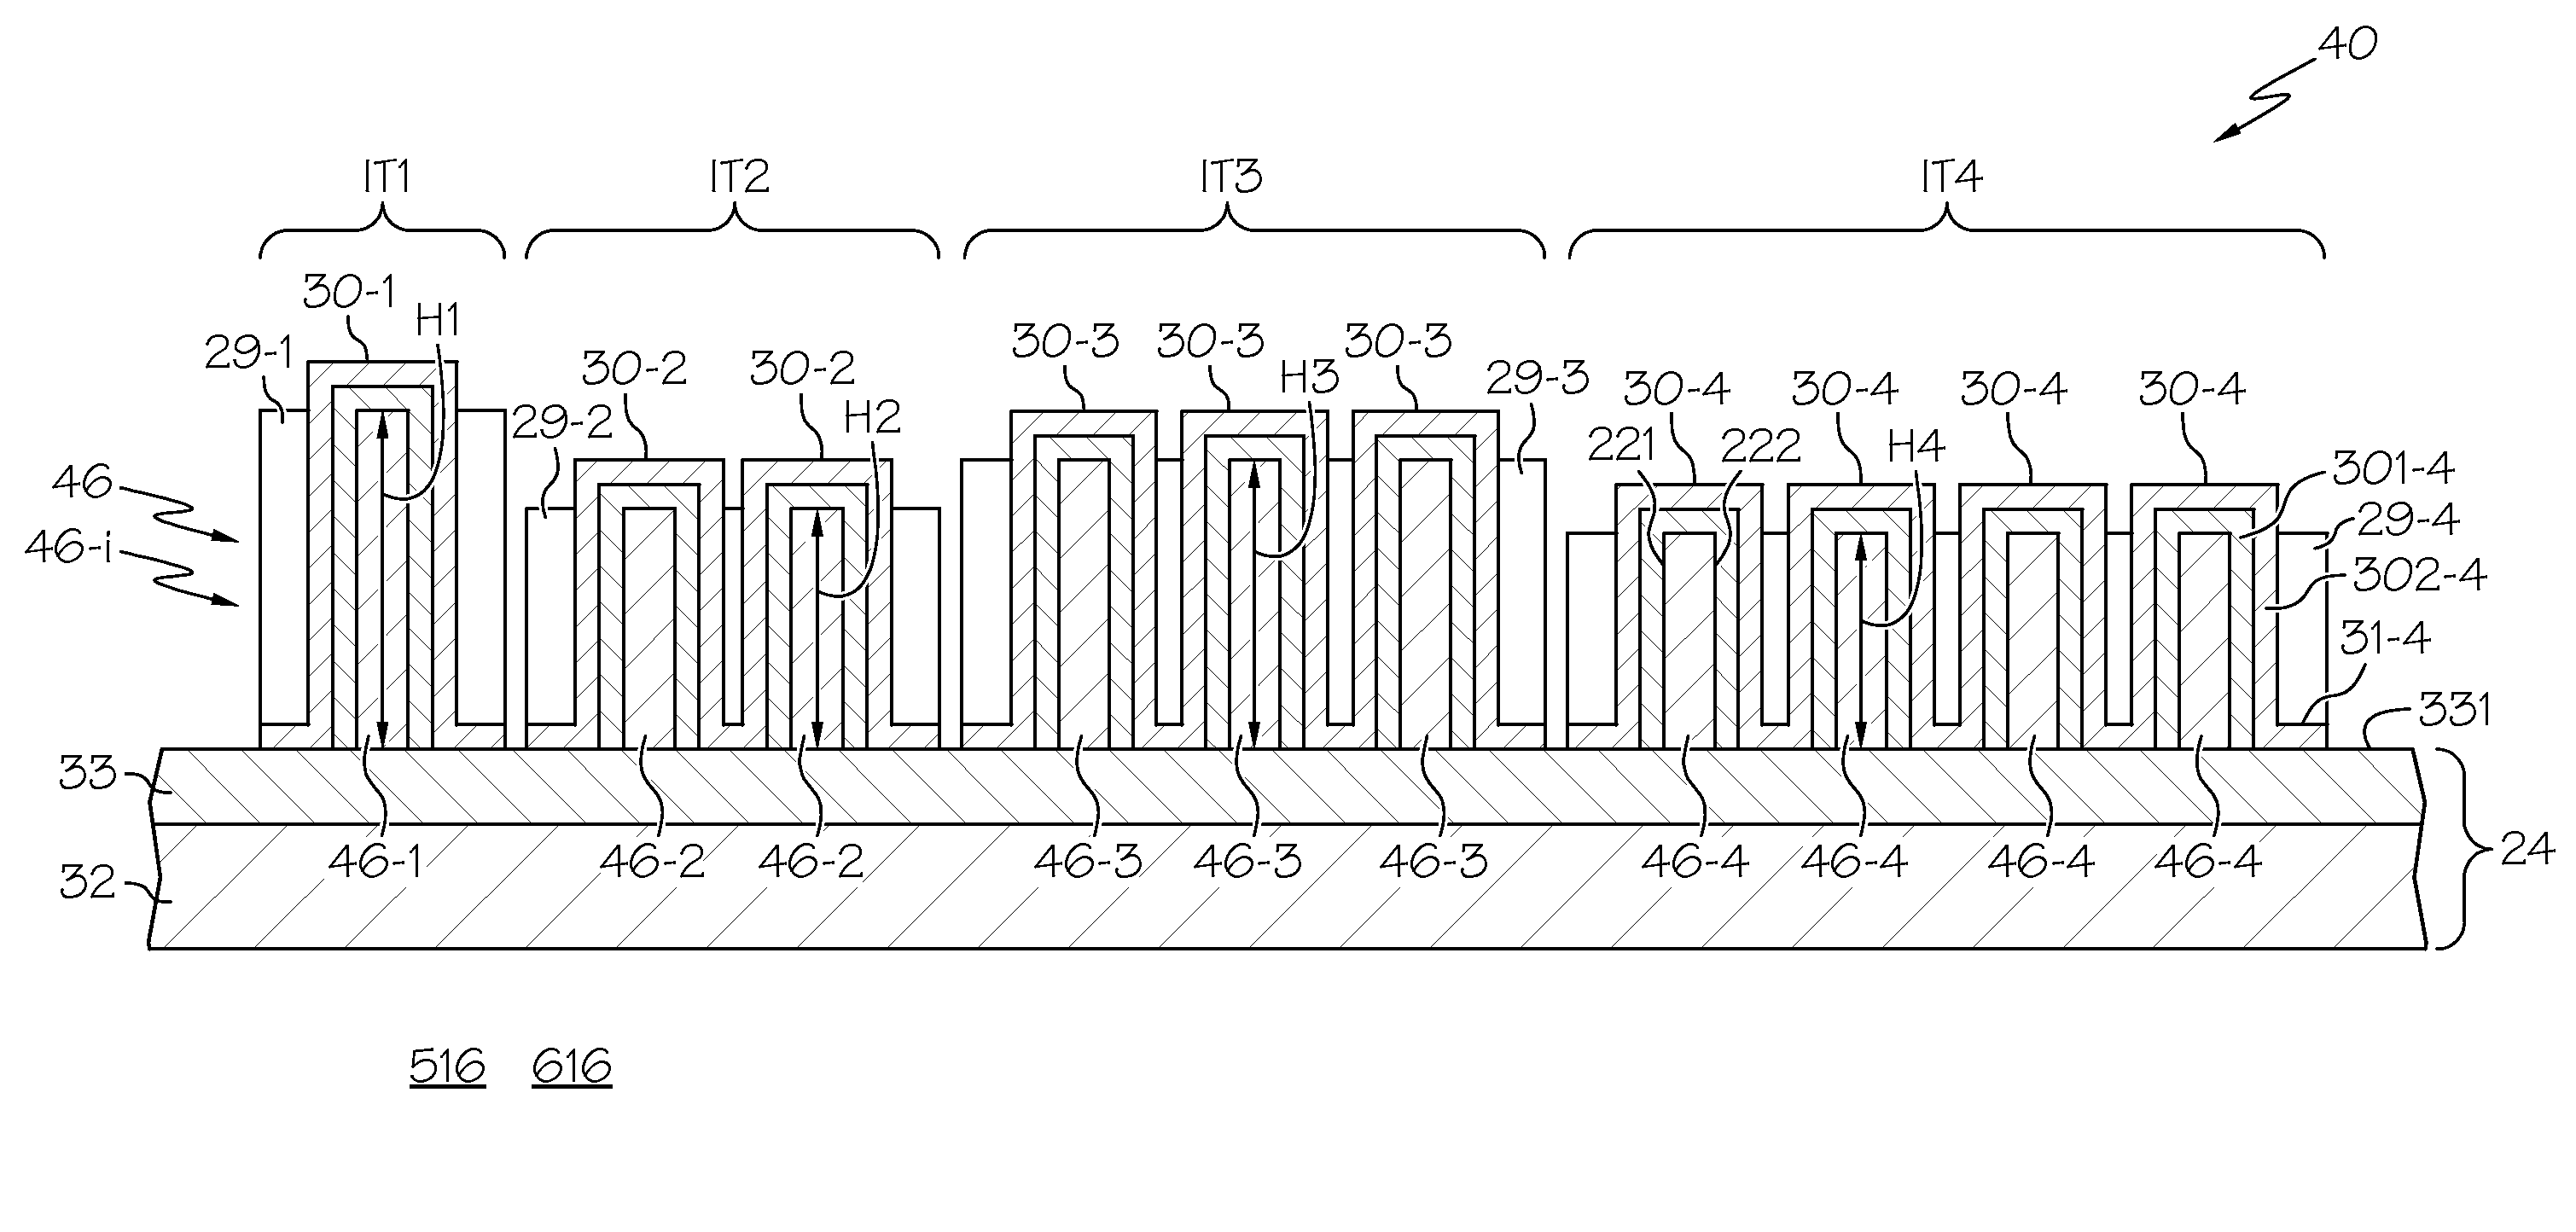 Fin-fet device and method and integrated circuits using such